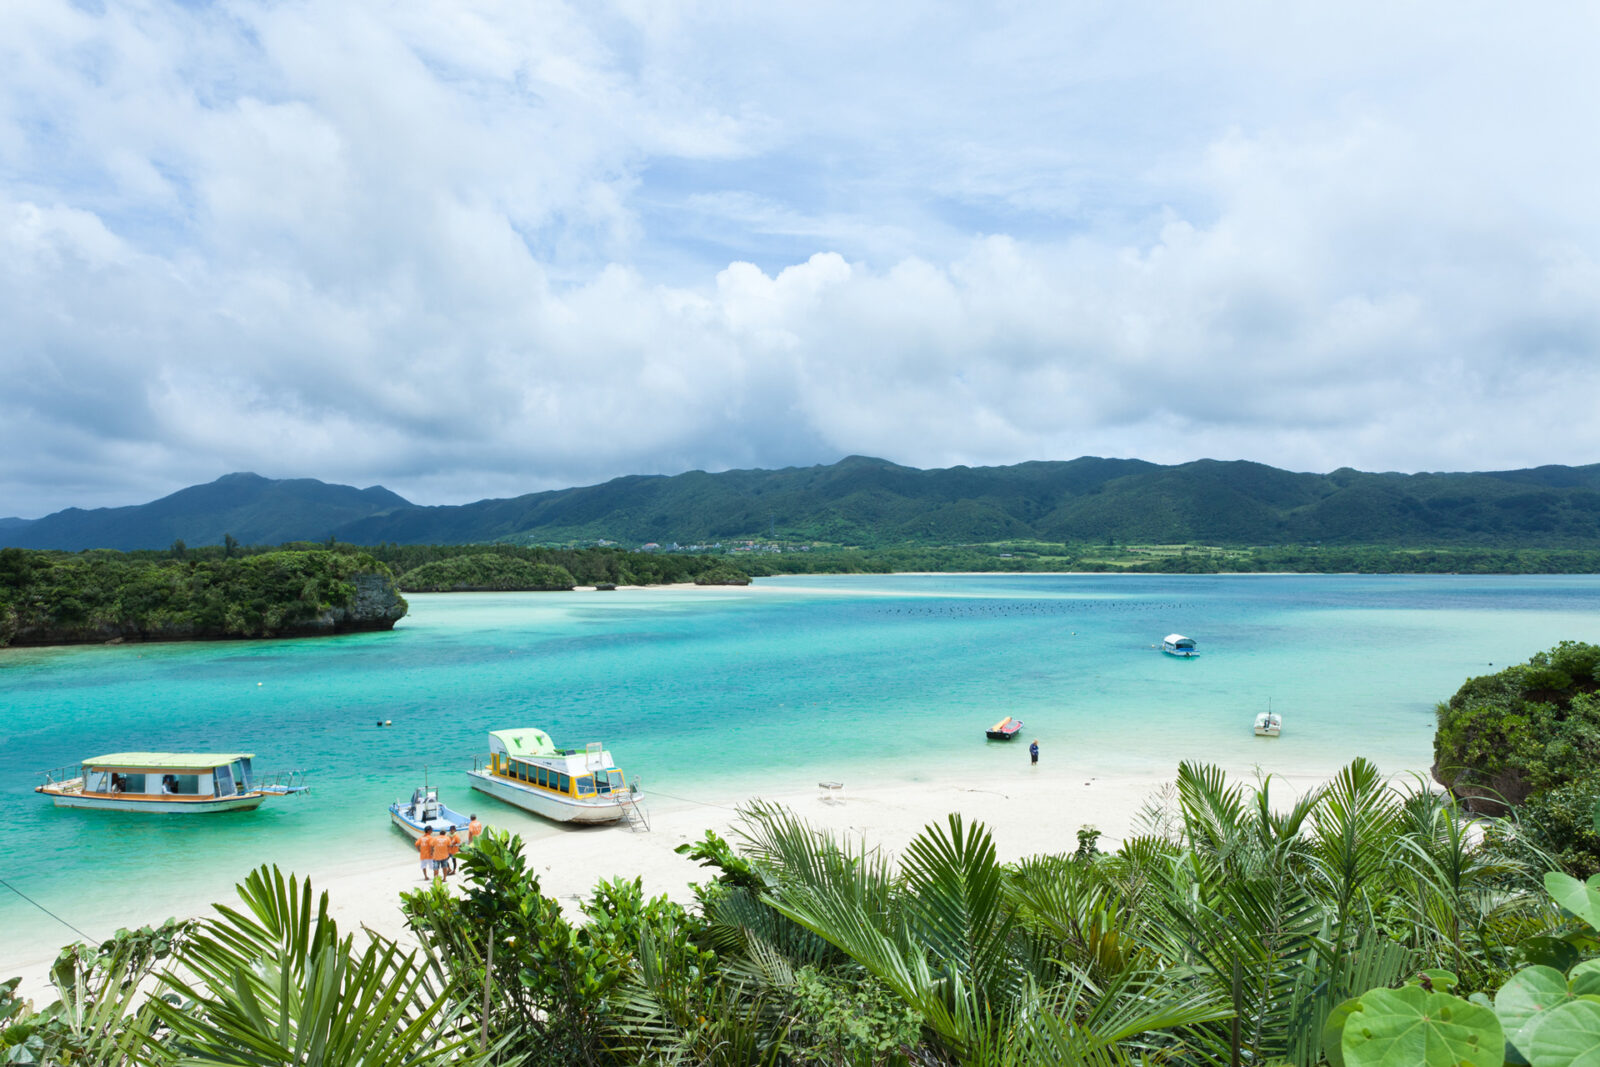 Things to Do in Okinawa: Top Attractions & Activities